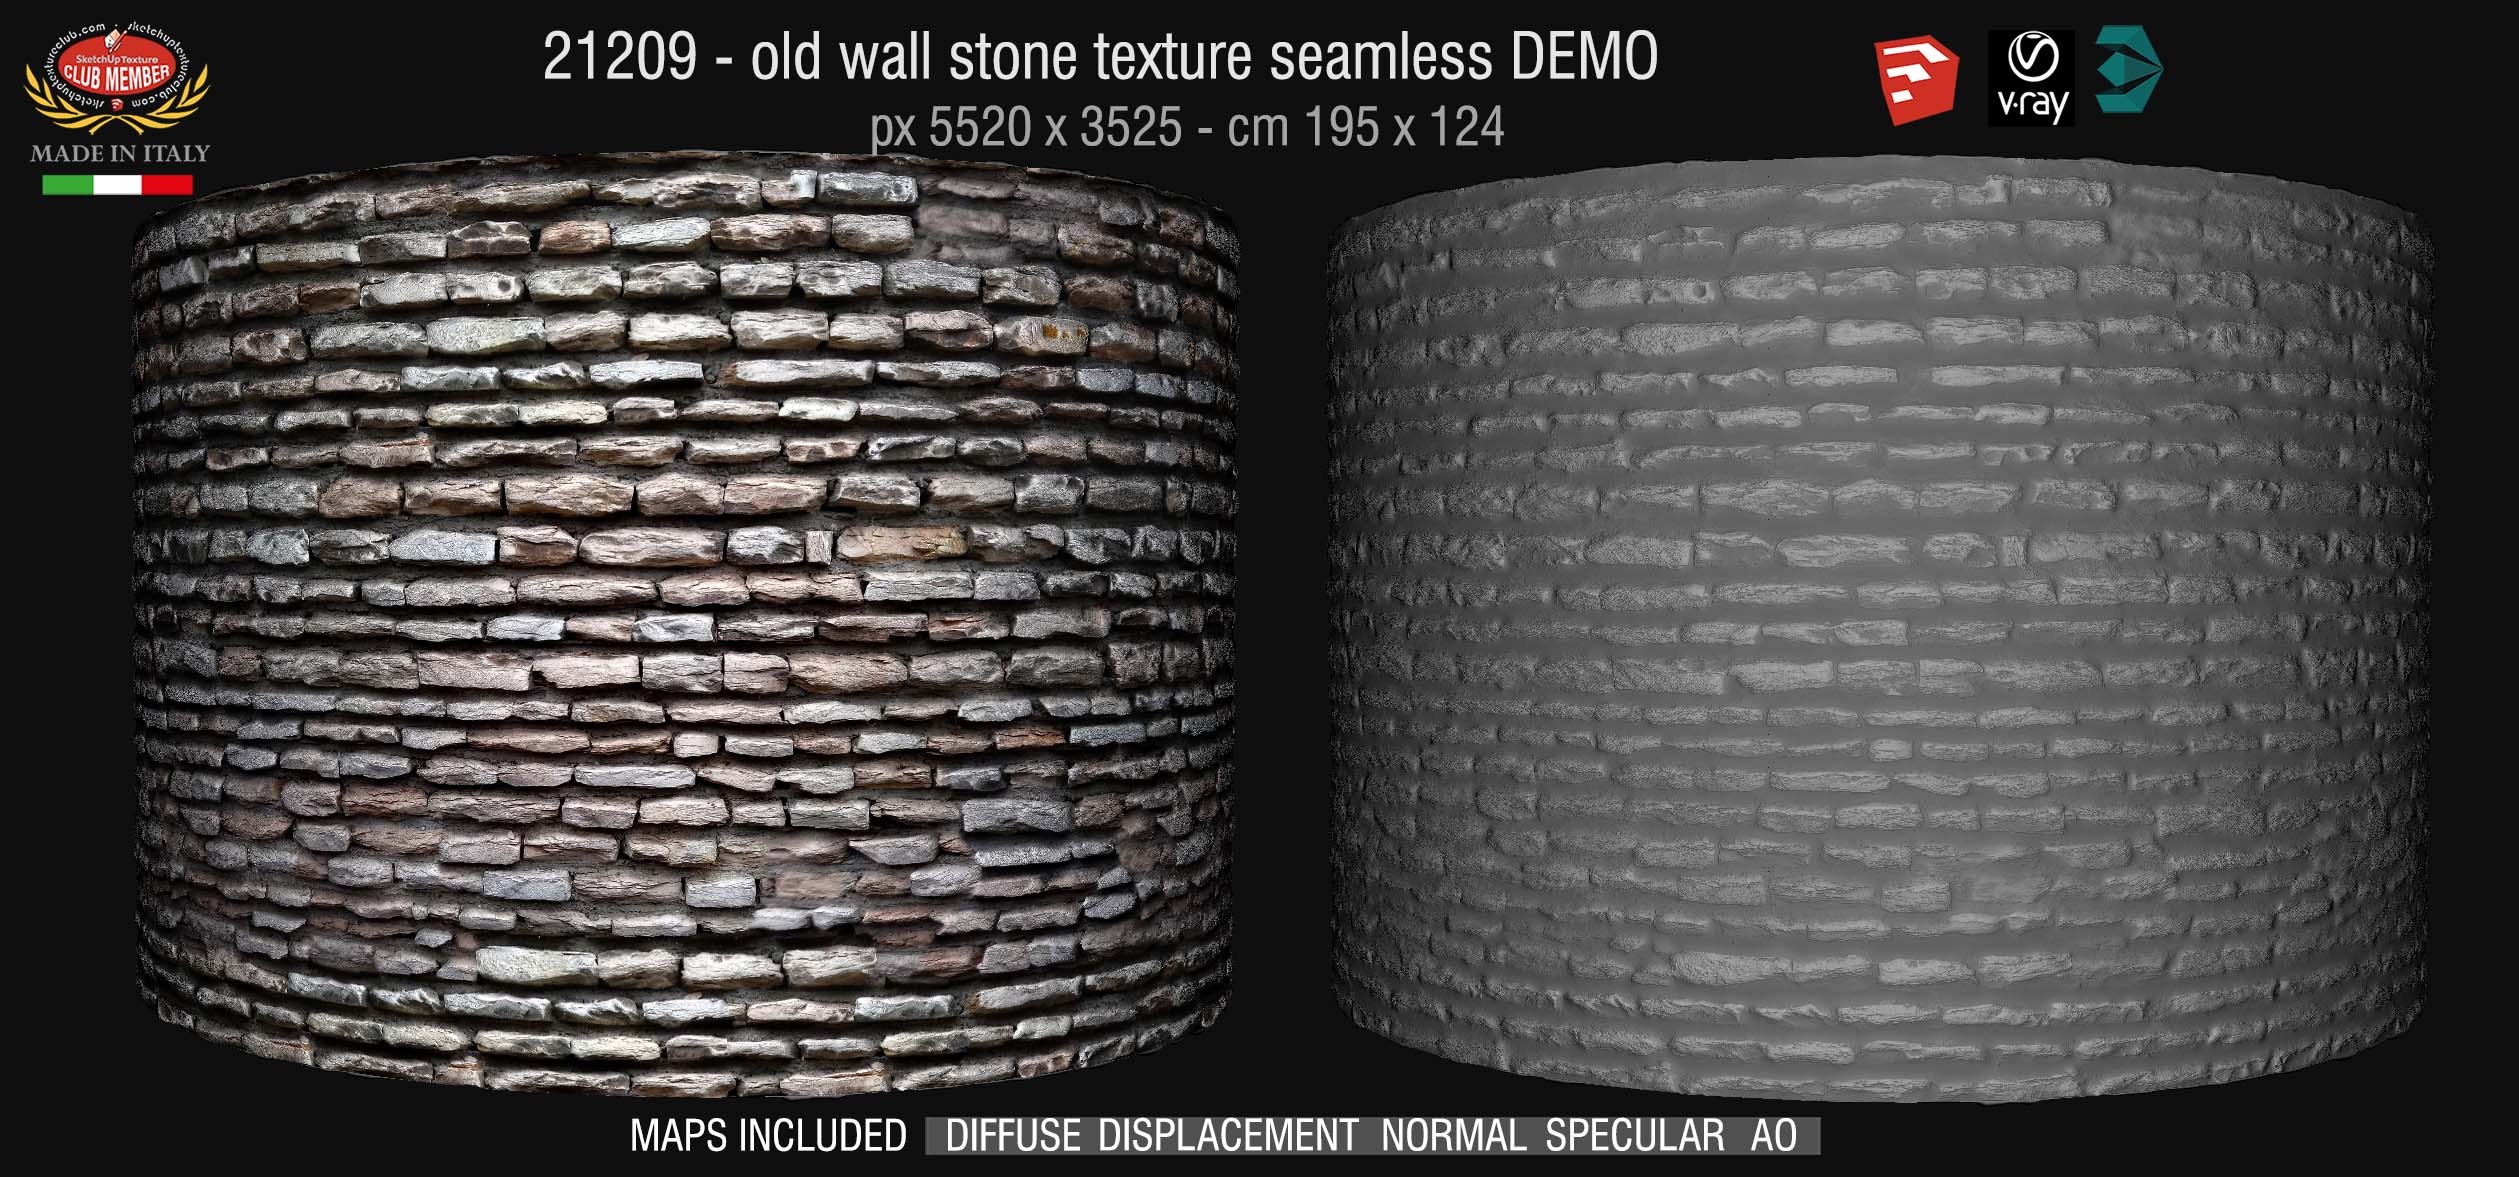 21209 HR Old wall stone texture + maps DEMO